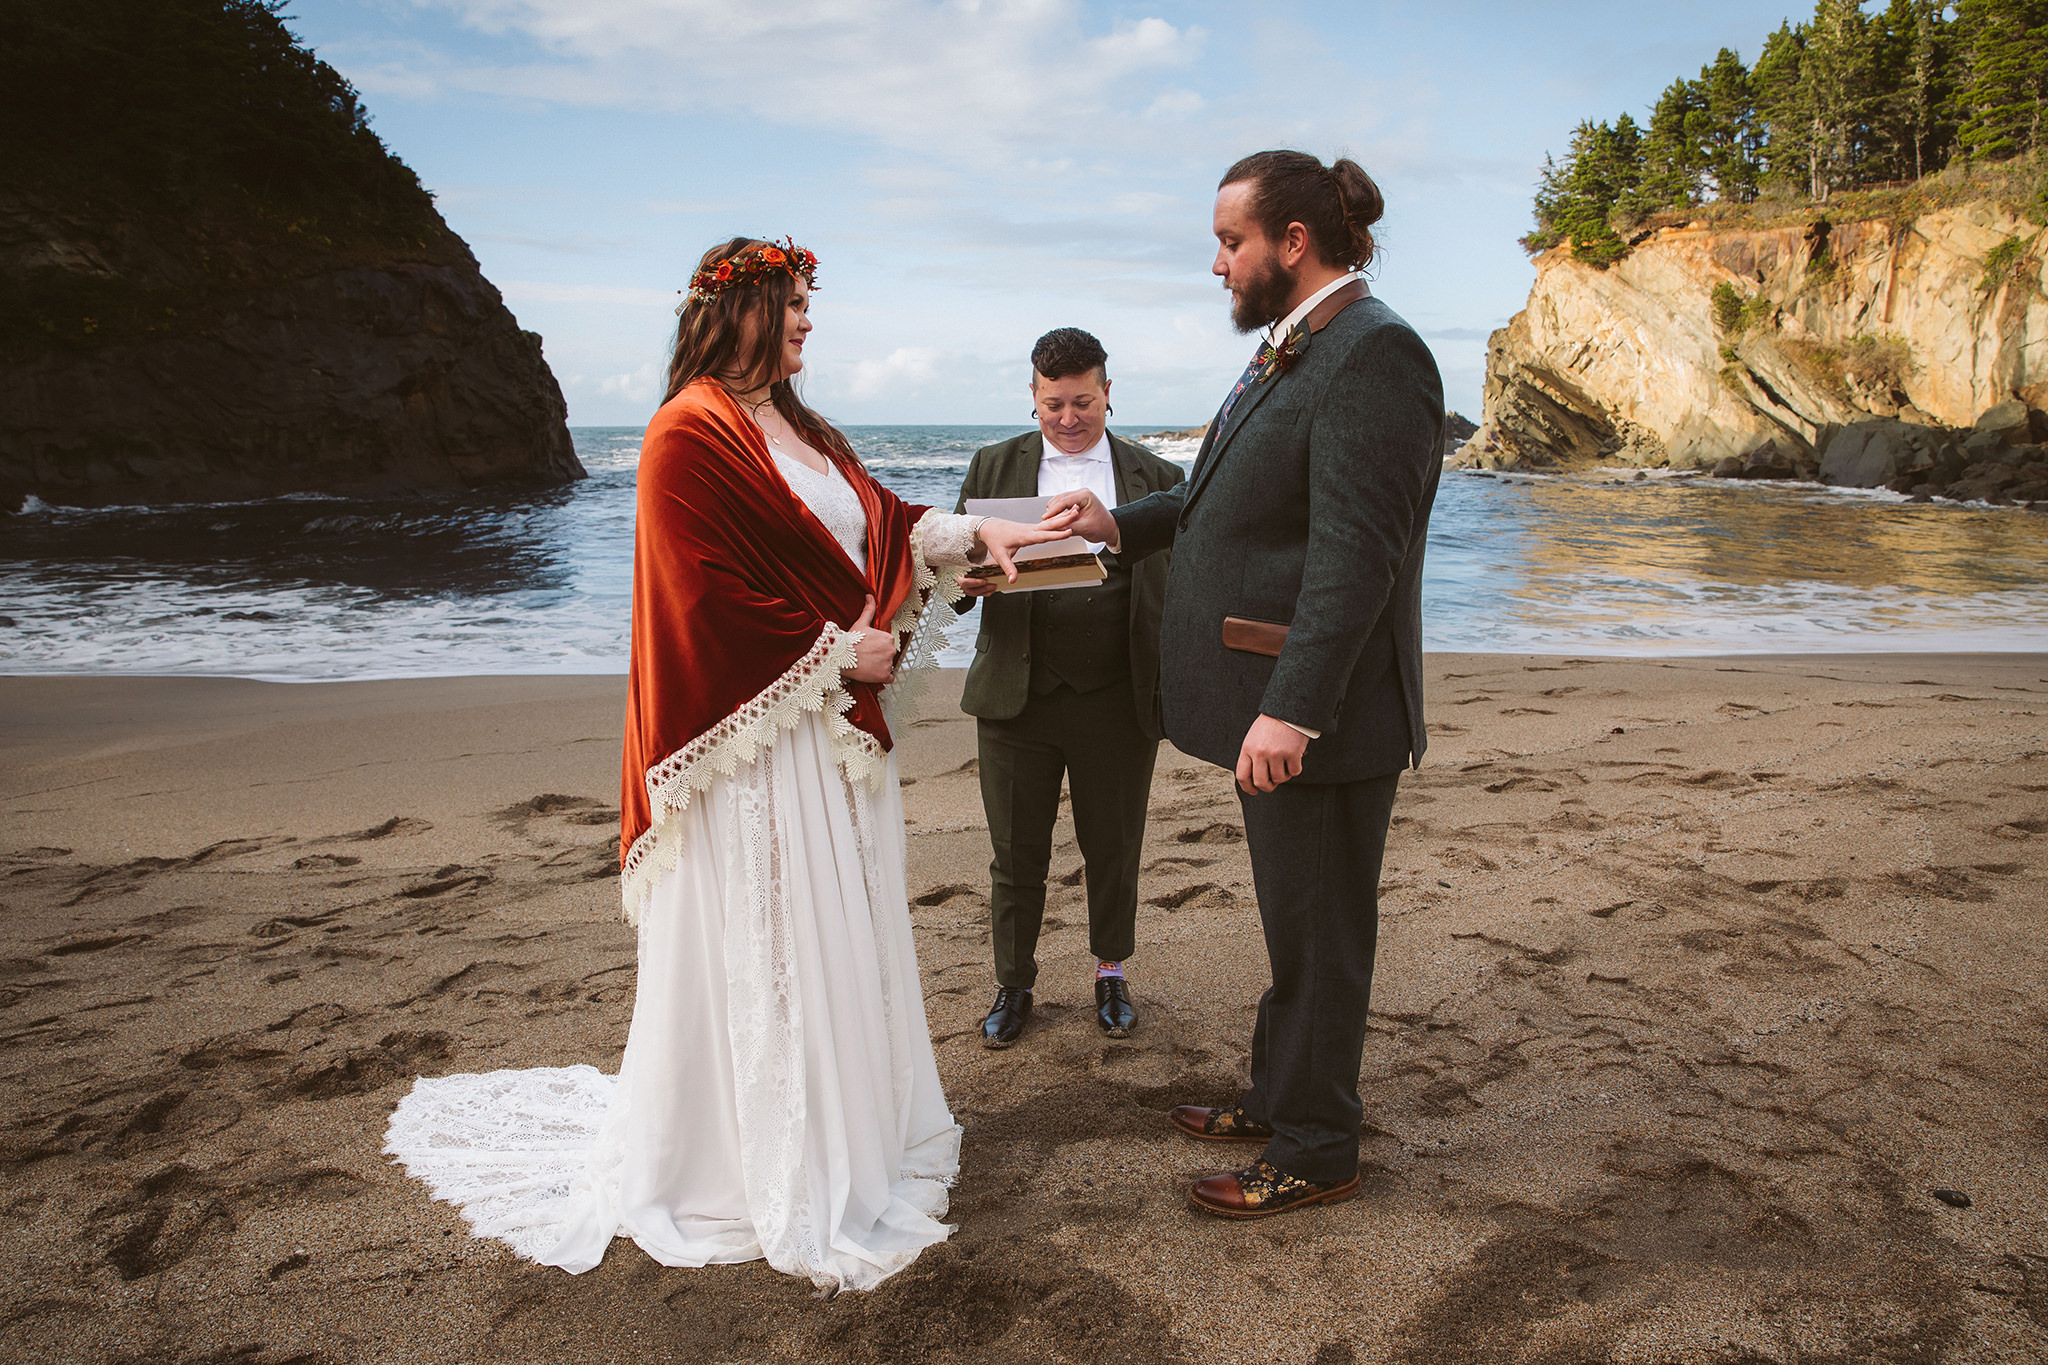 A bride and groom exchanging rings during their elopement ceremony on Simpson beach 